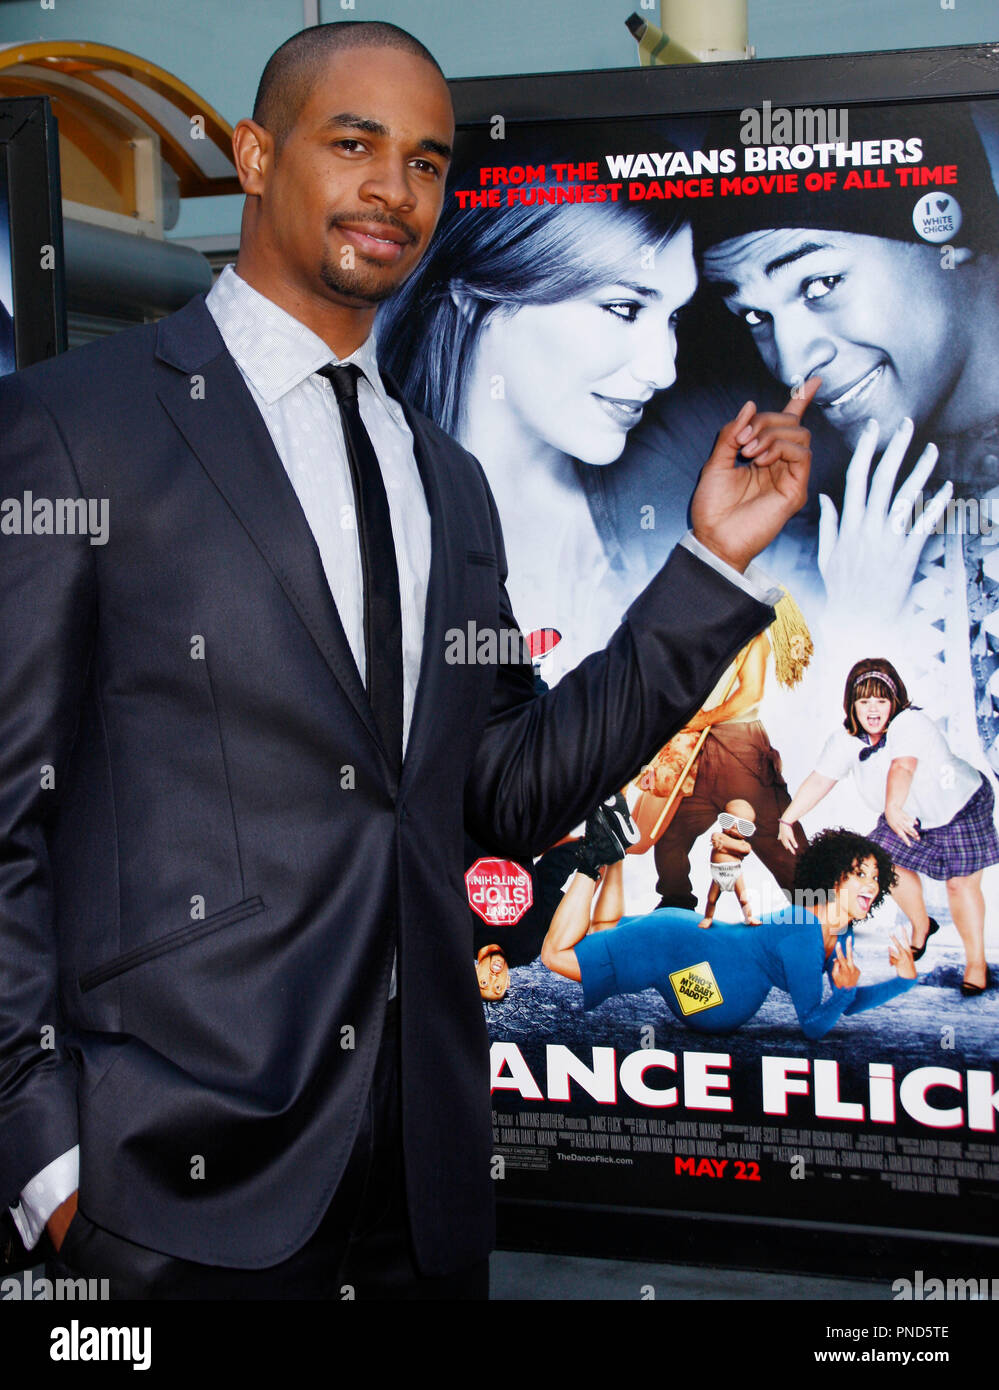 Damon Wayans Jr at the Los Angeles Premiere of DANCE FLICK held at the Arclight Theatres in Hollywood, CA on Wednesday, May 20, 2009. Photo by PRPP / PictureLux  File Reference # Damon Wayans Jr 05202009 03PRPP  For Editorial Use Only -  All Rights Reserved Stock Photo